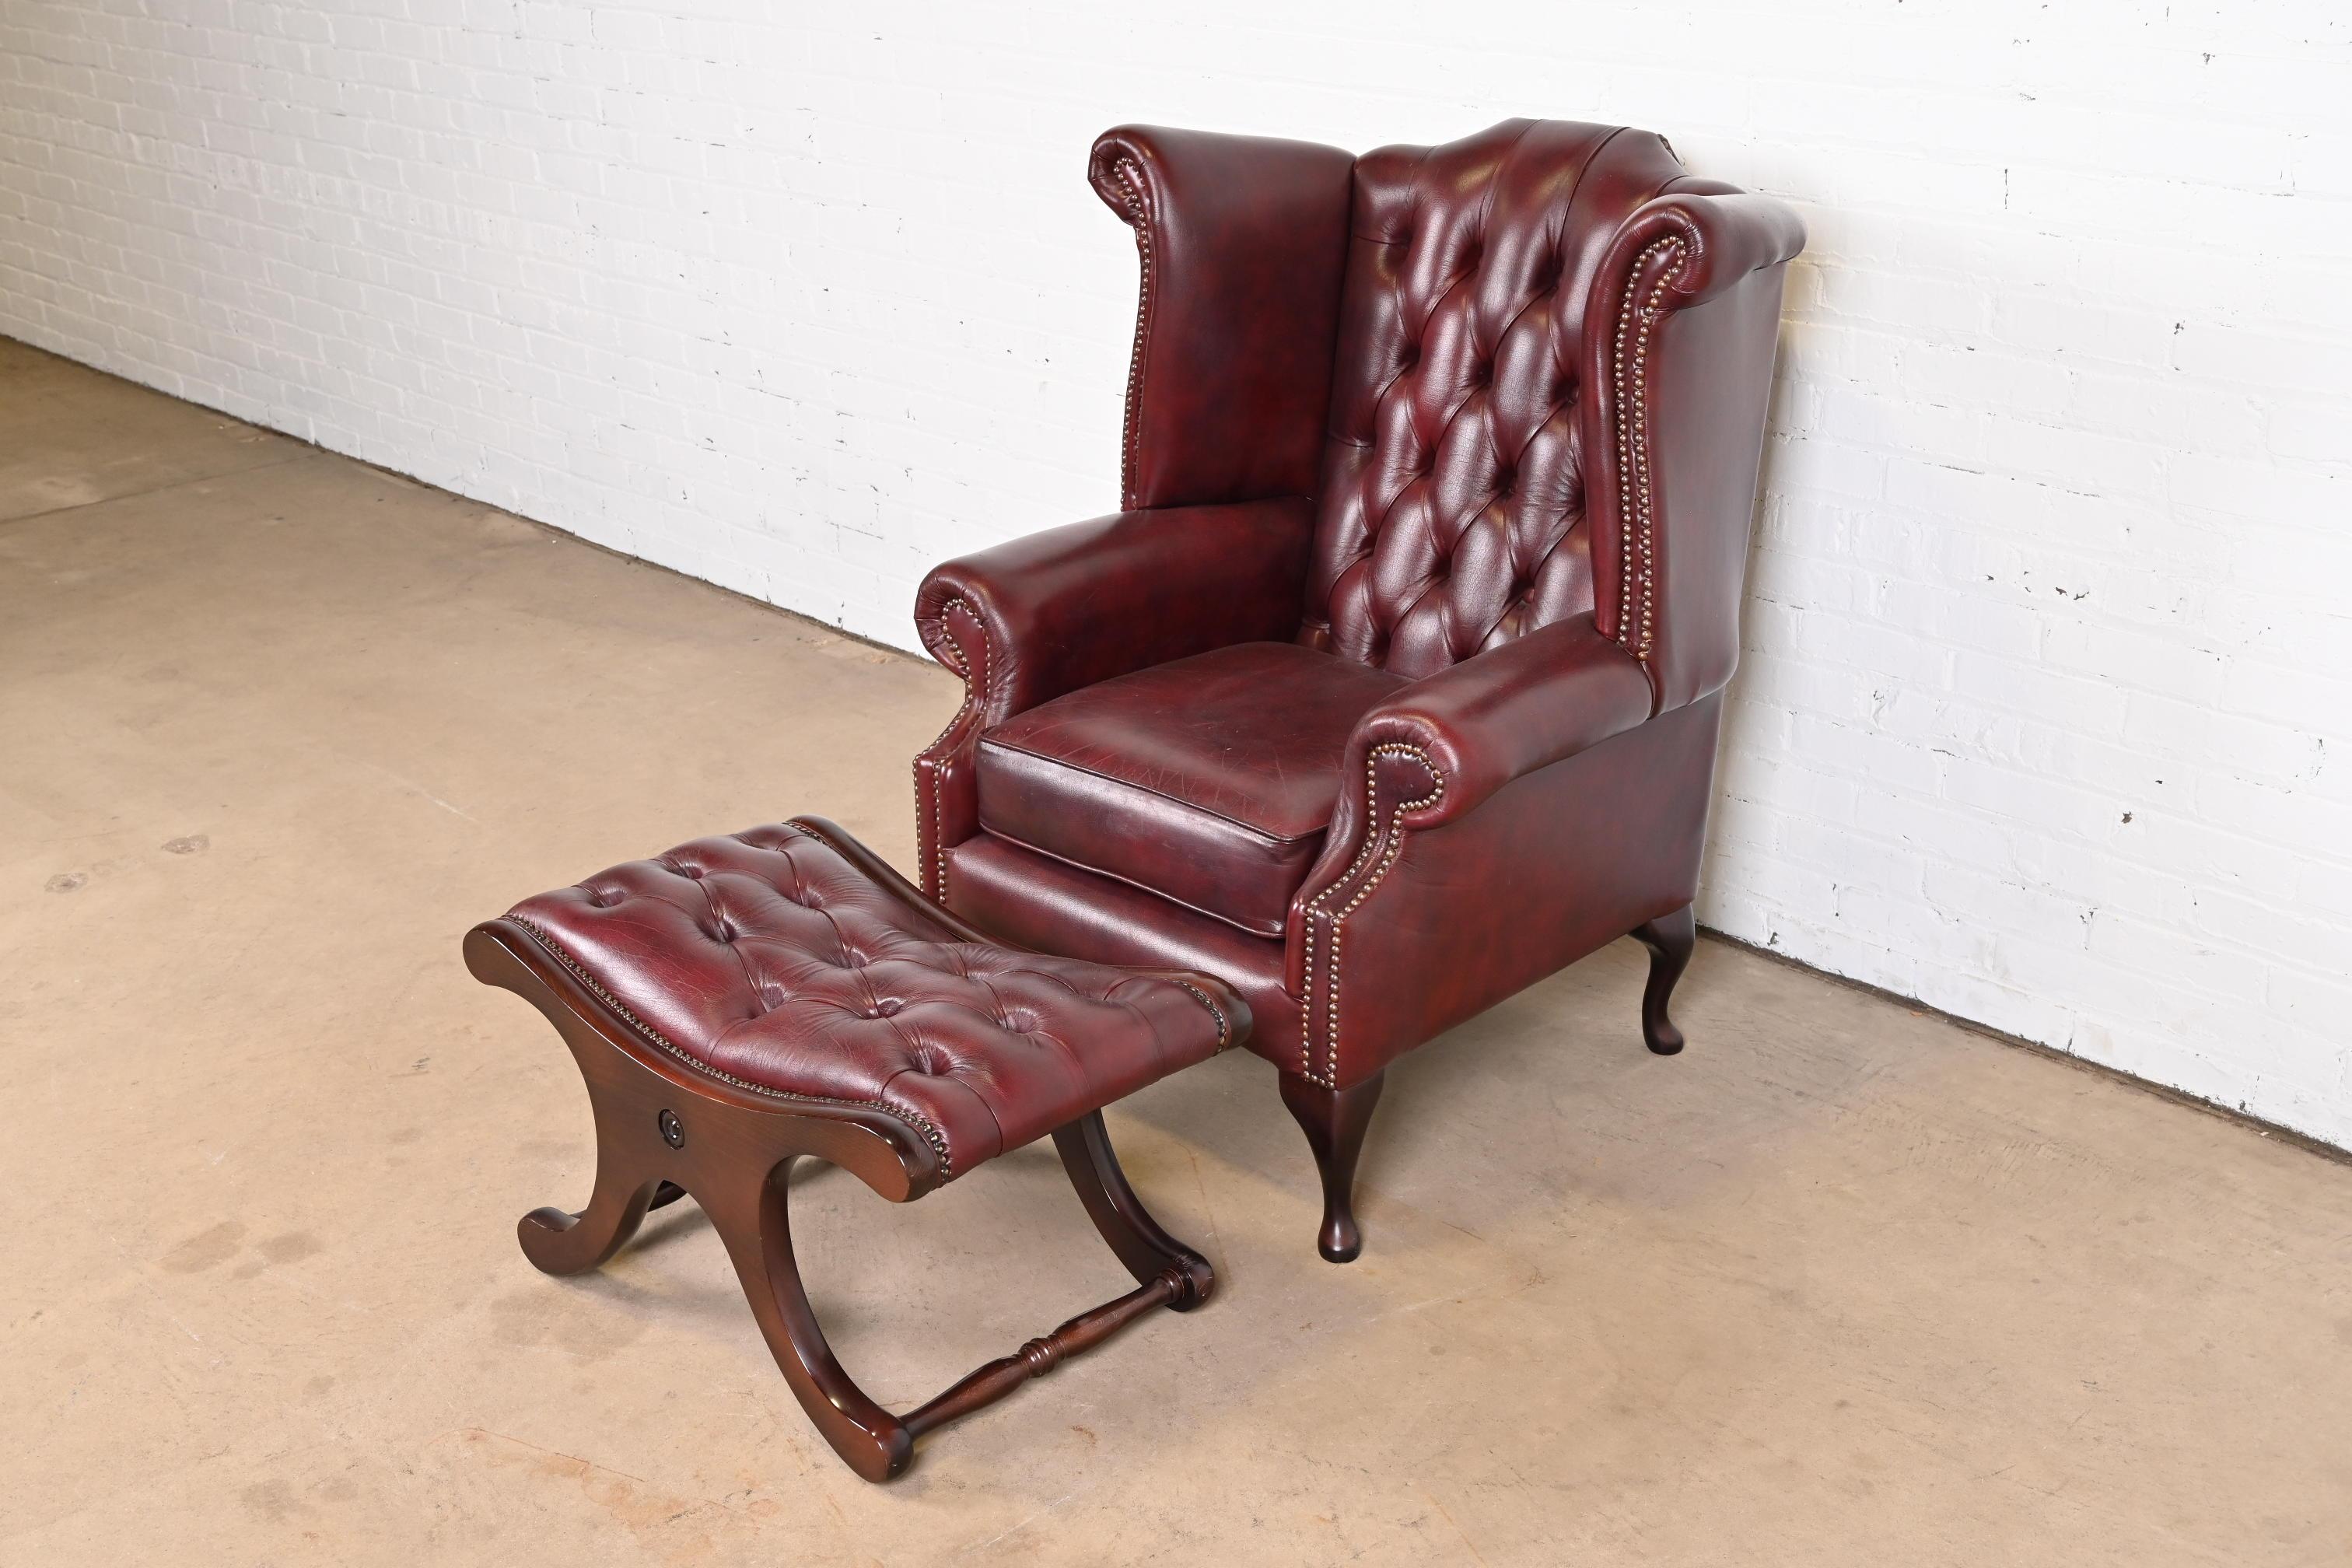 20th Century Vintage English Oxblood Leather Chesterfield Wingback Lounge Chair with Ottoman